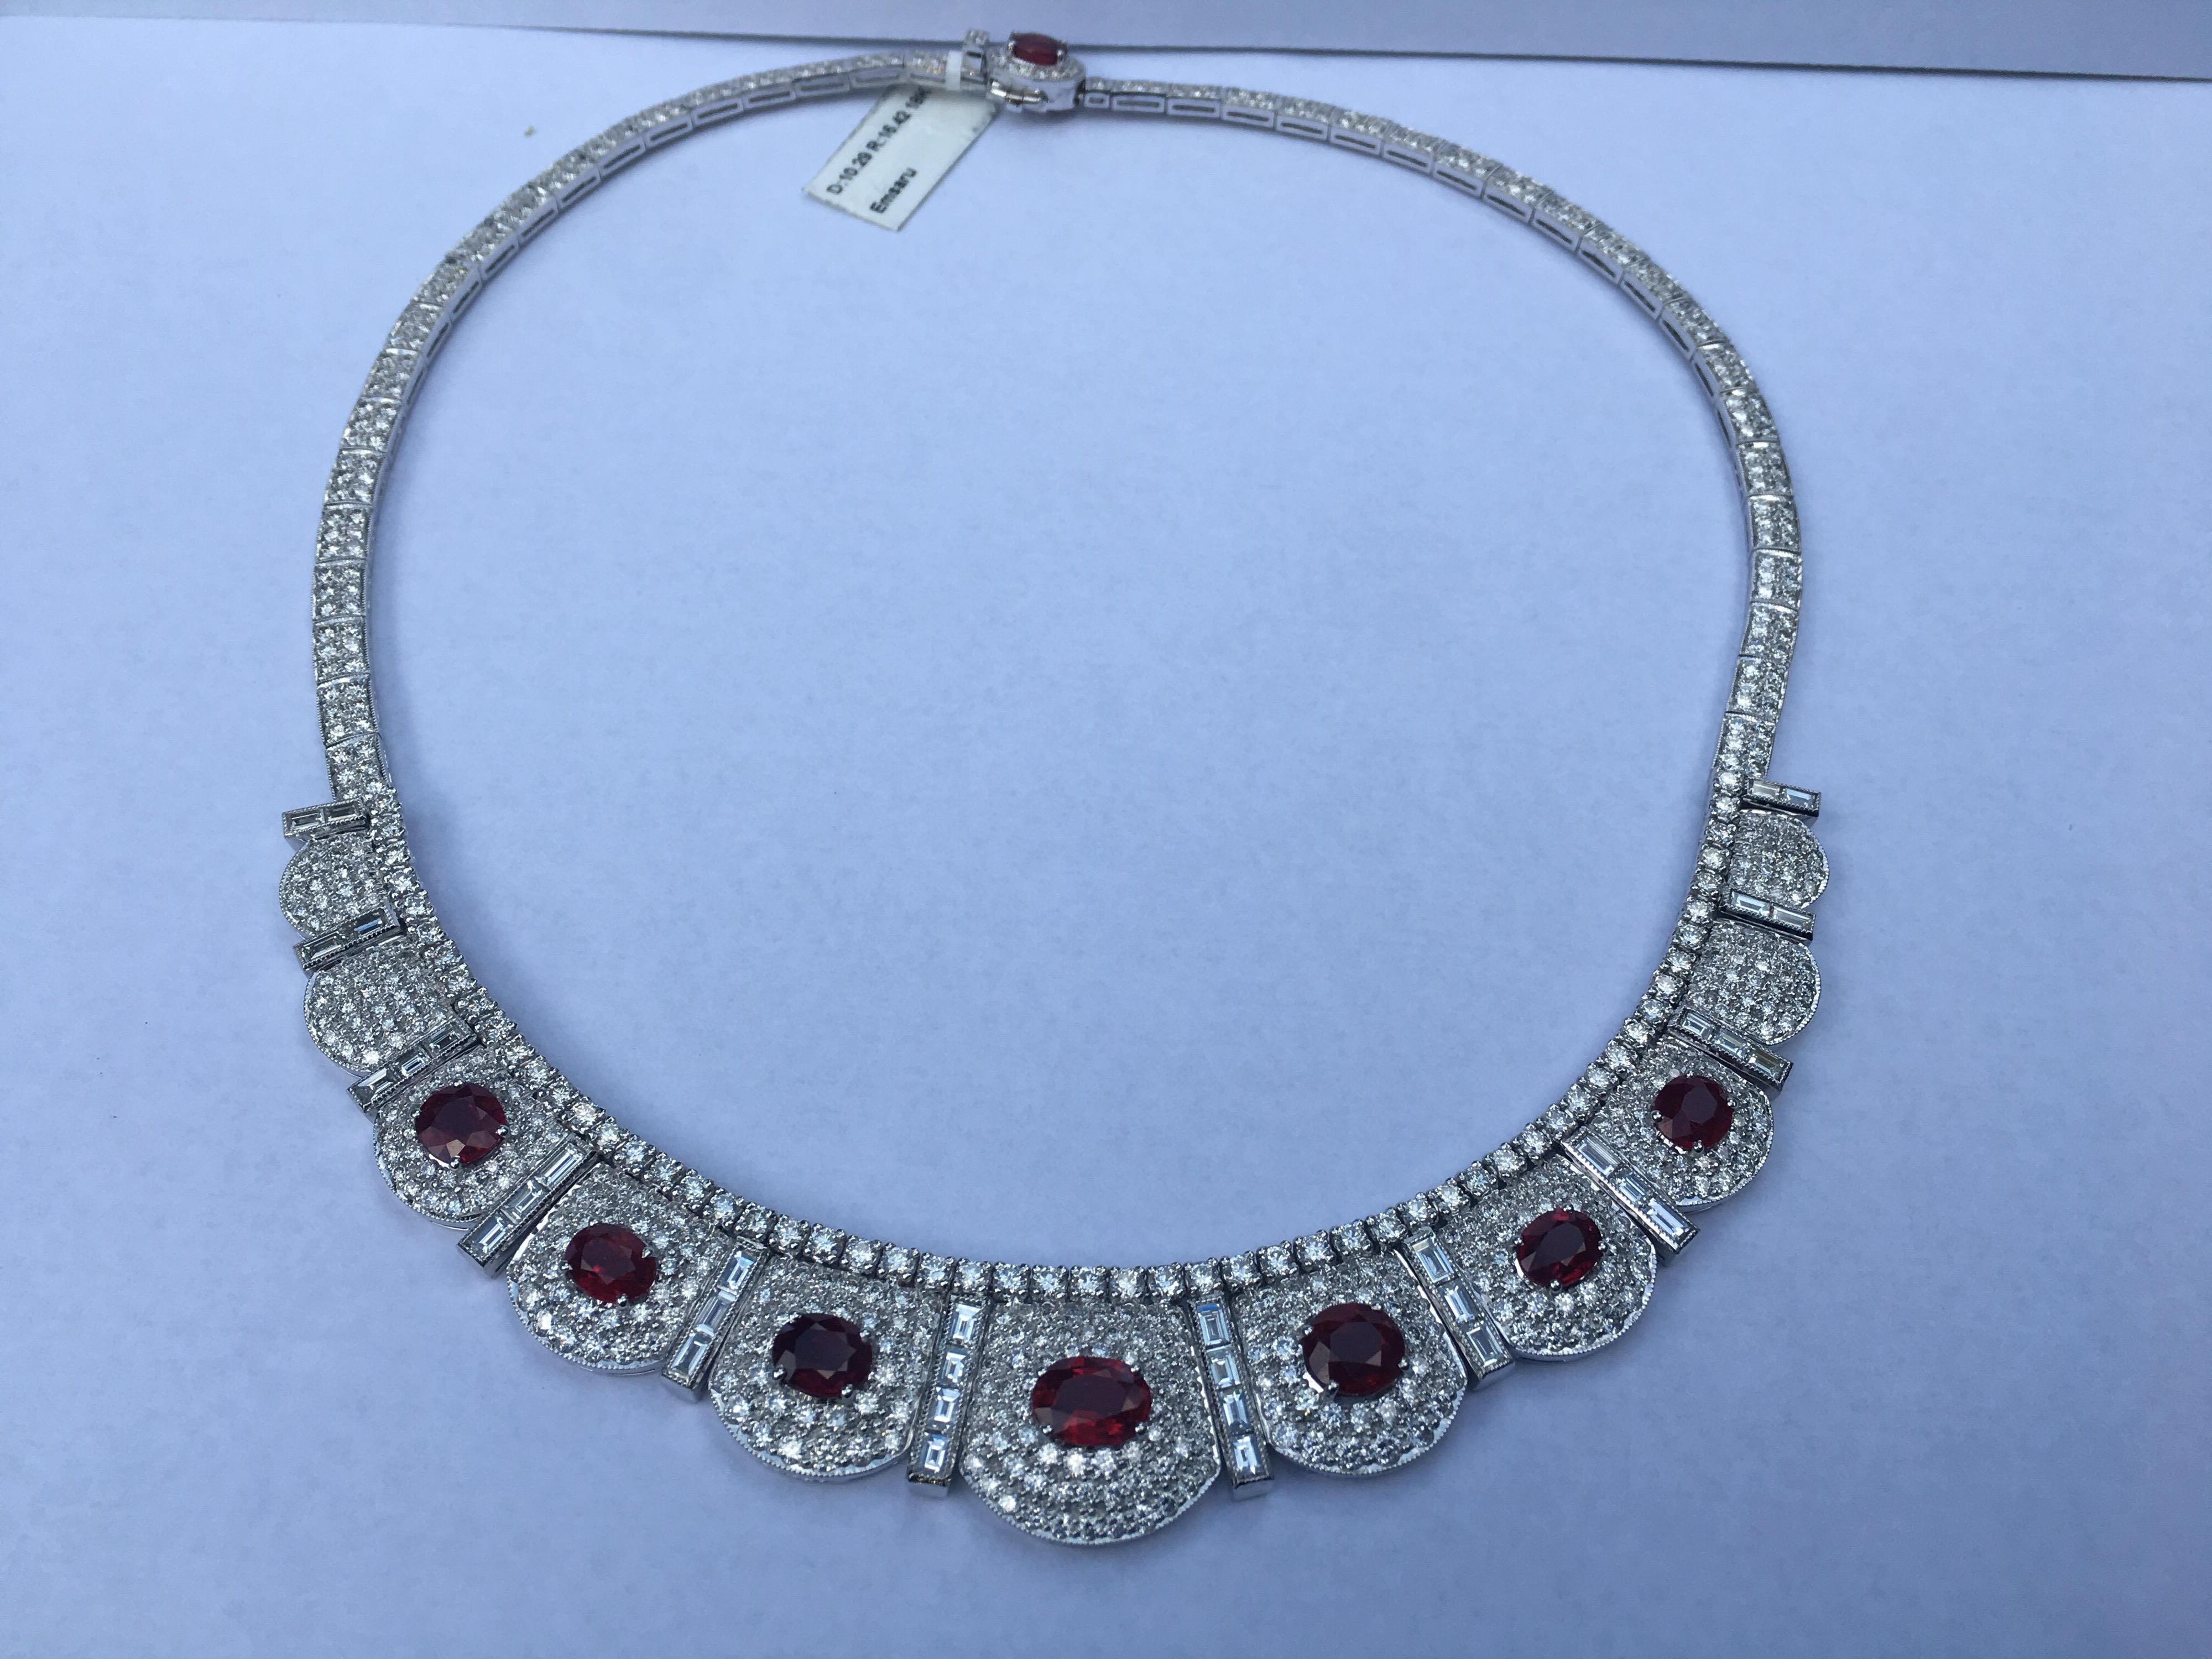 Natural Burma Ruby (Heated ) Set In 18K White Gold. Total Ruby Weight is 10.29 Carat and Total Diamond weight is 16.42 Carat. One of a kind Necklace is Hand crafted .